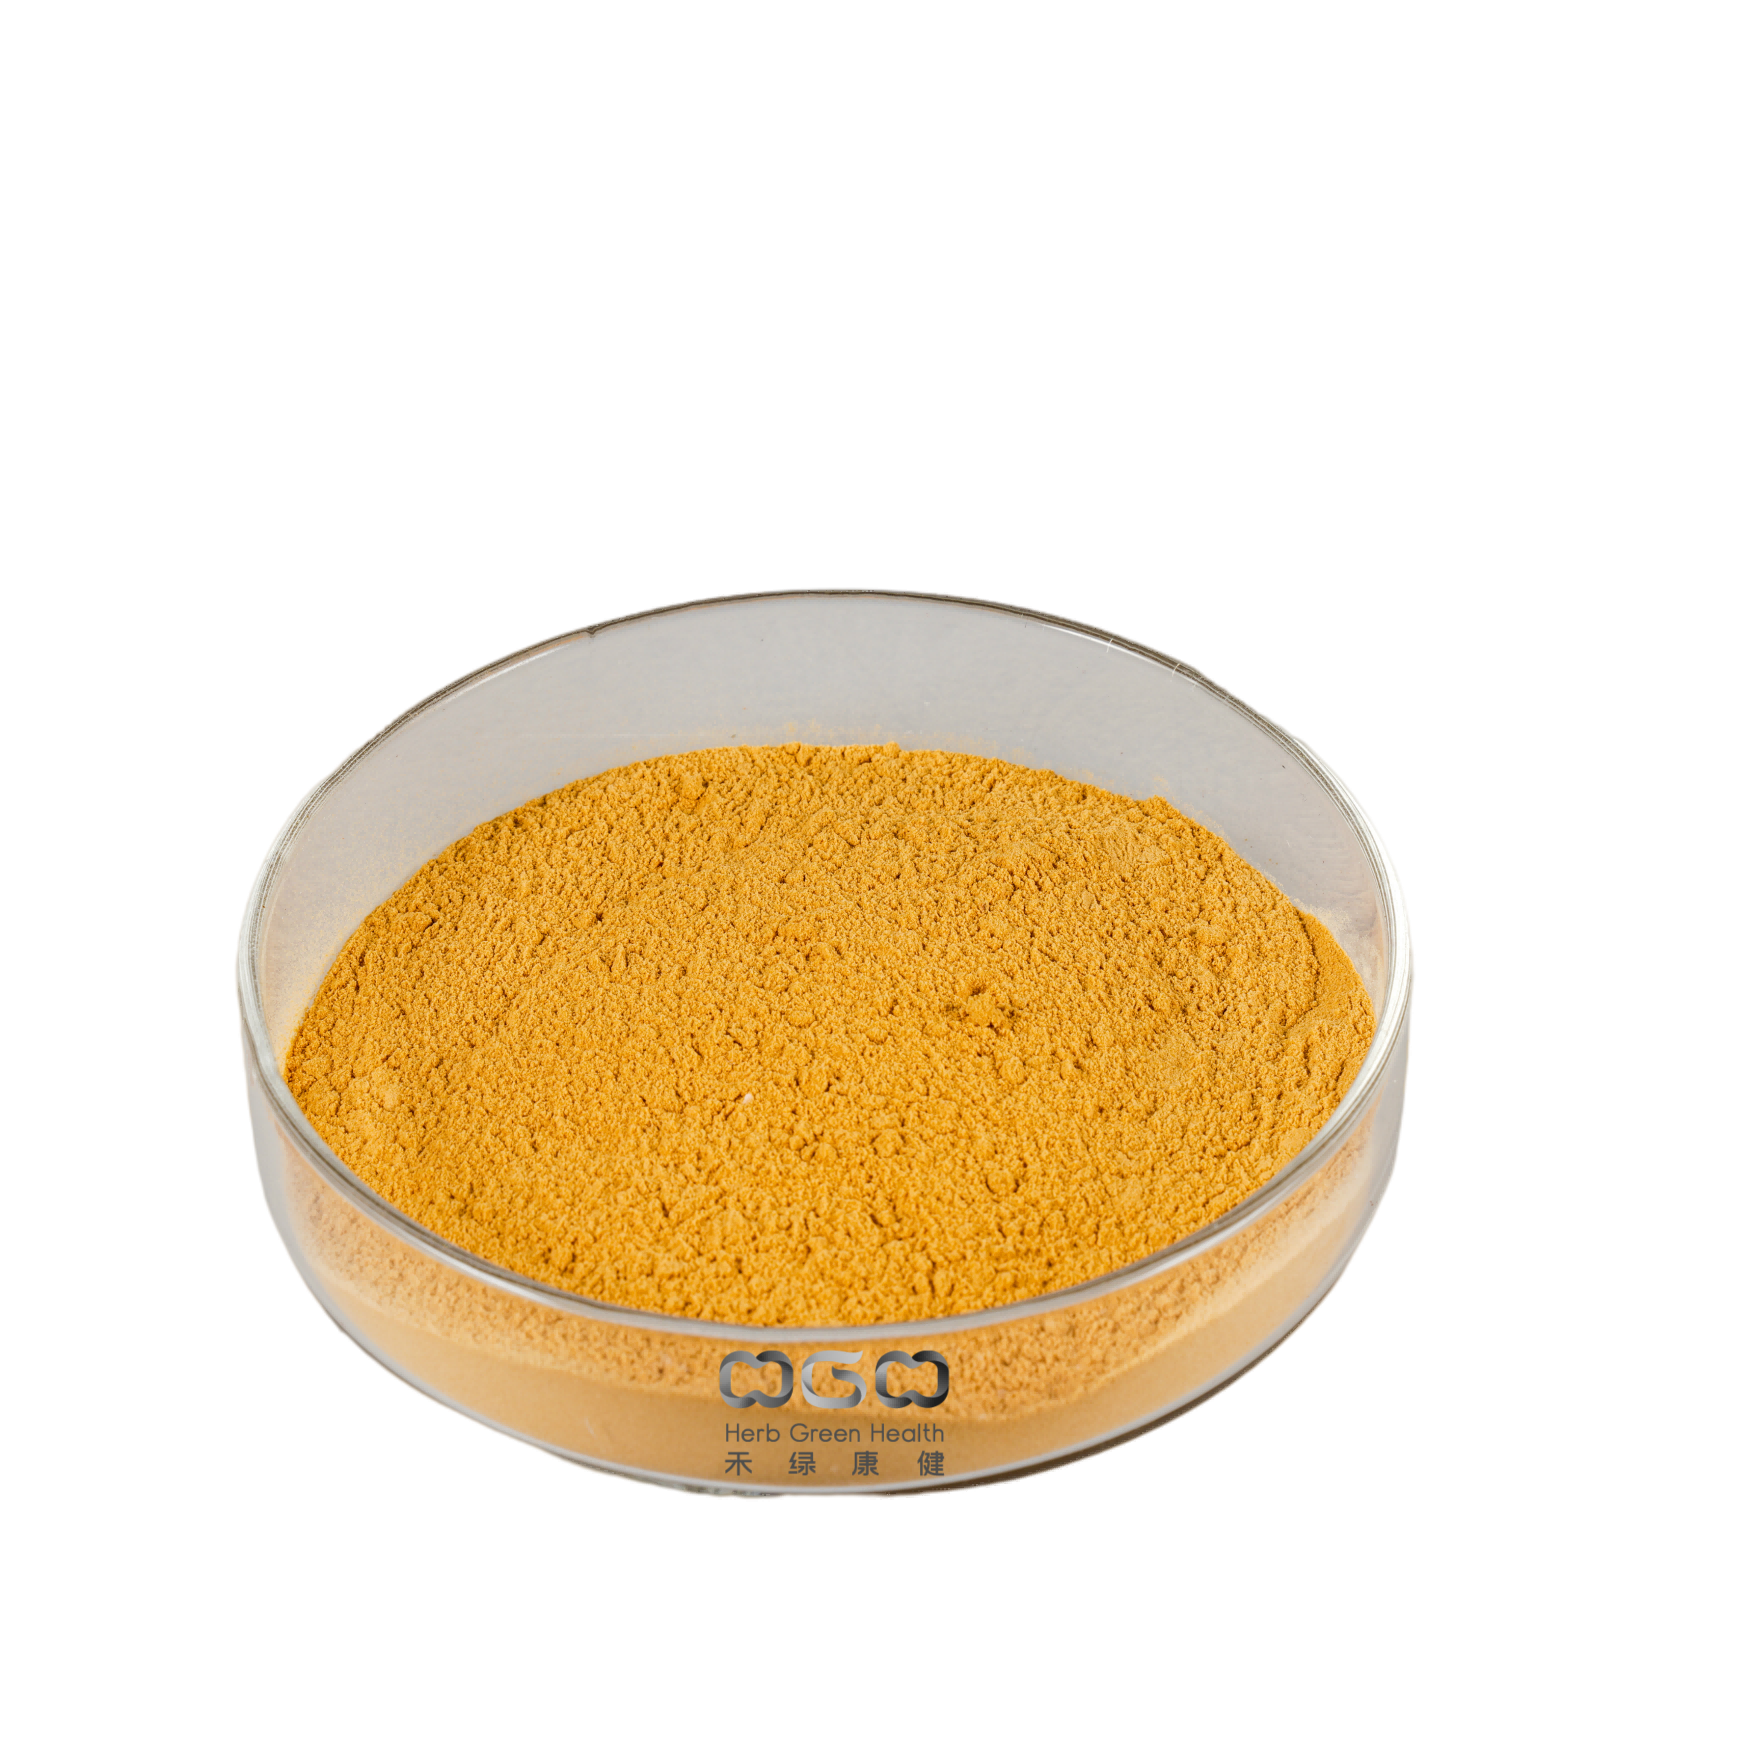 Sea-Buckthorn Fruit Extract Powder For Skin